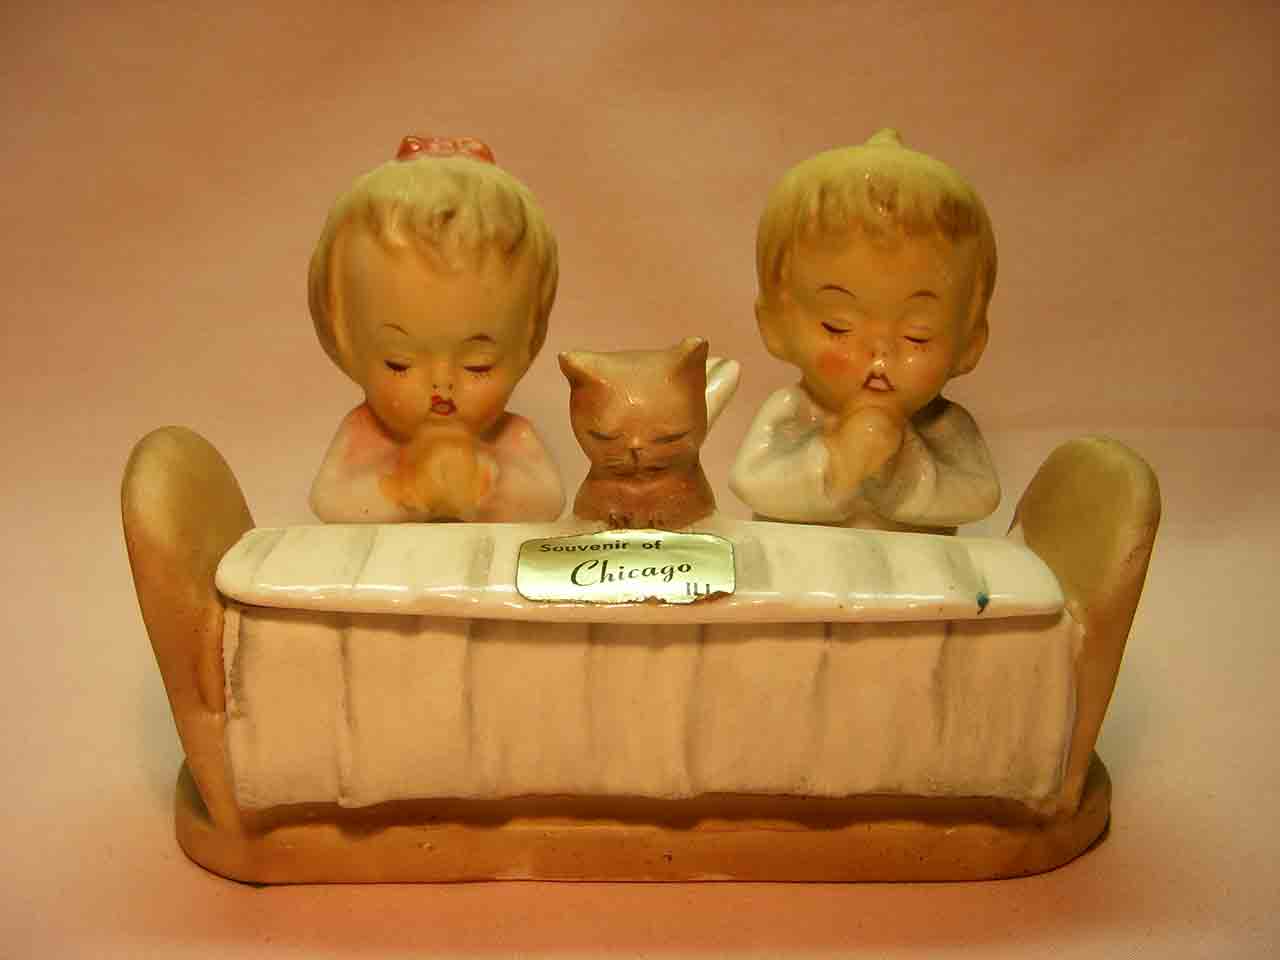 Bedtime prayer salt and pepper shakers and condiment set